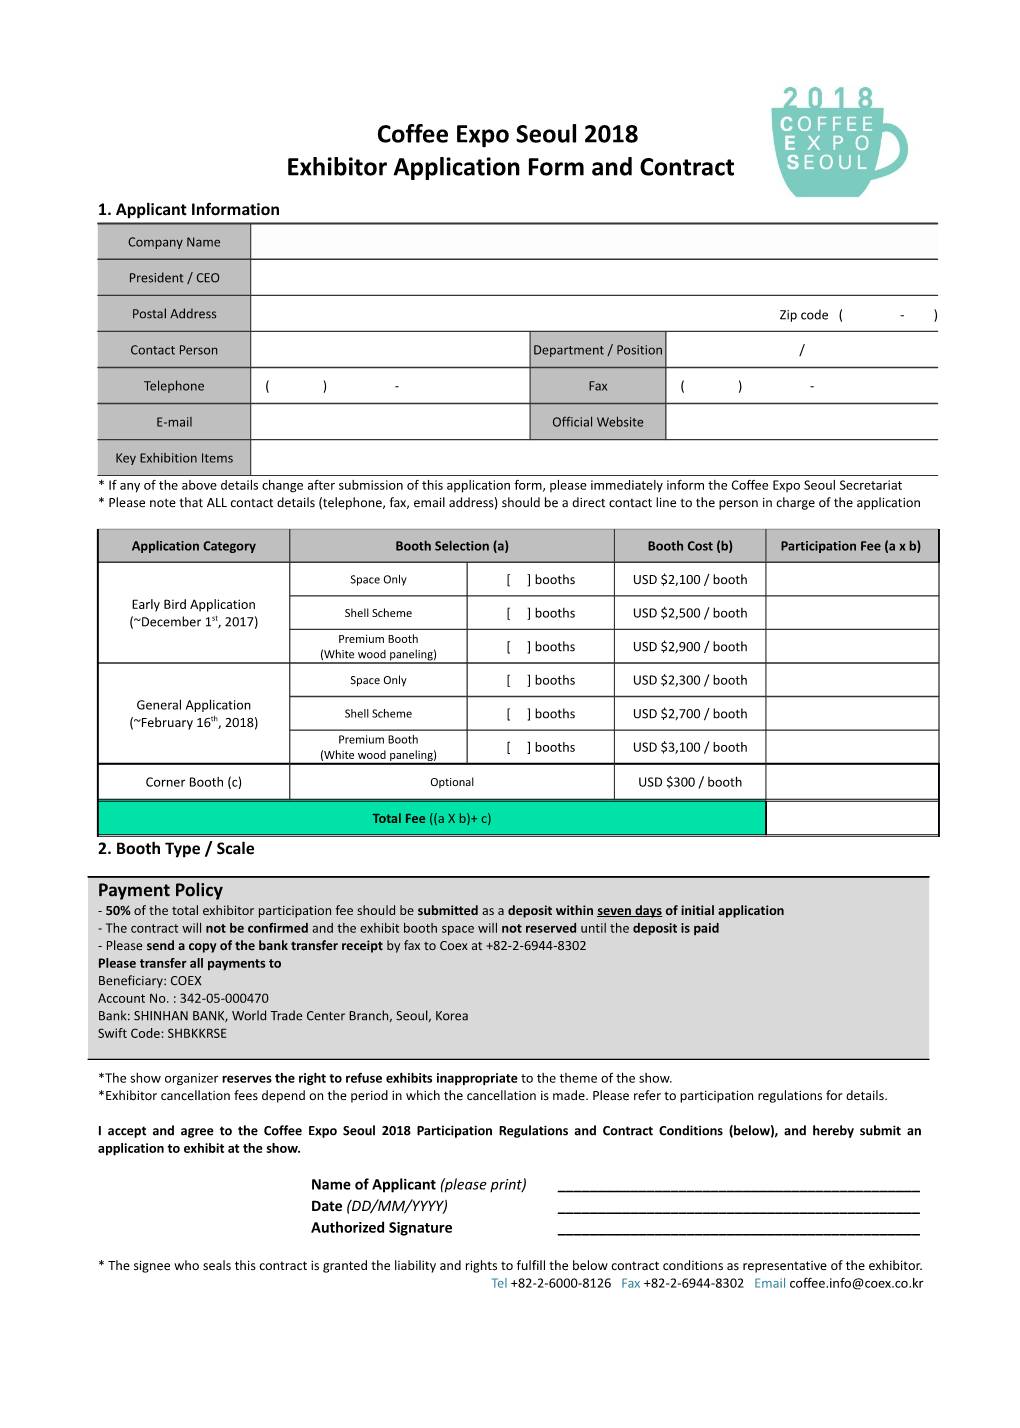 Exhibitor Application Form and Contract